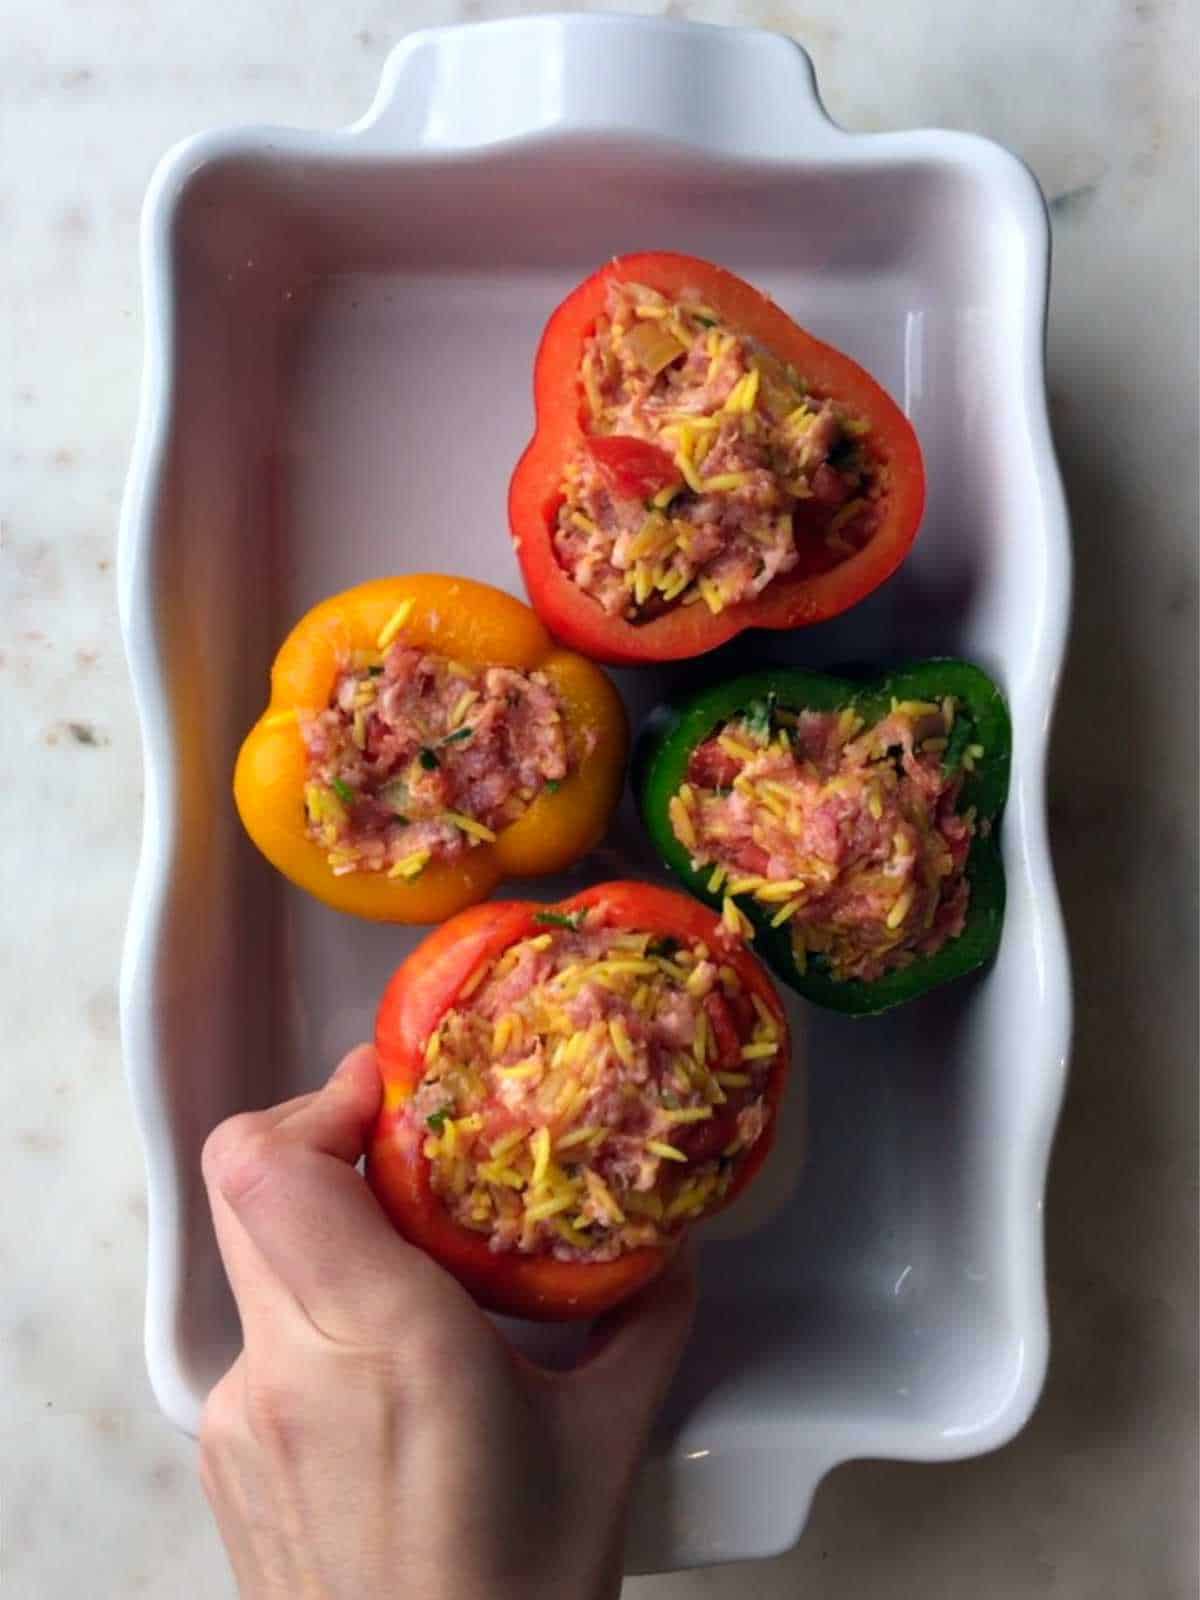 Stuffing peppers with rice filling.